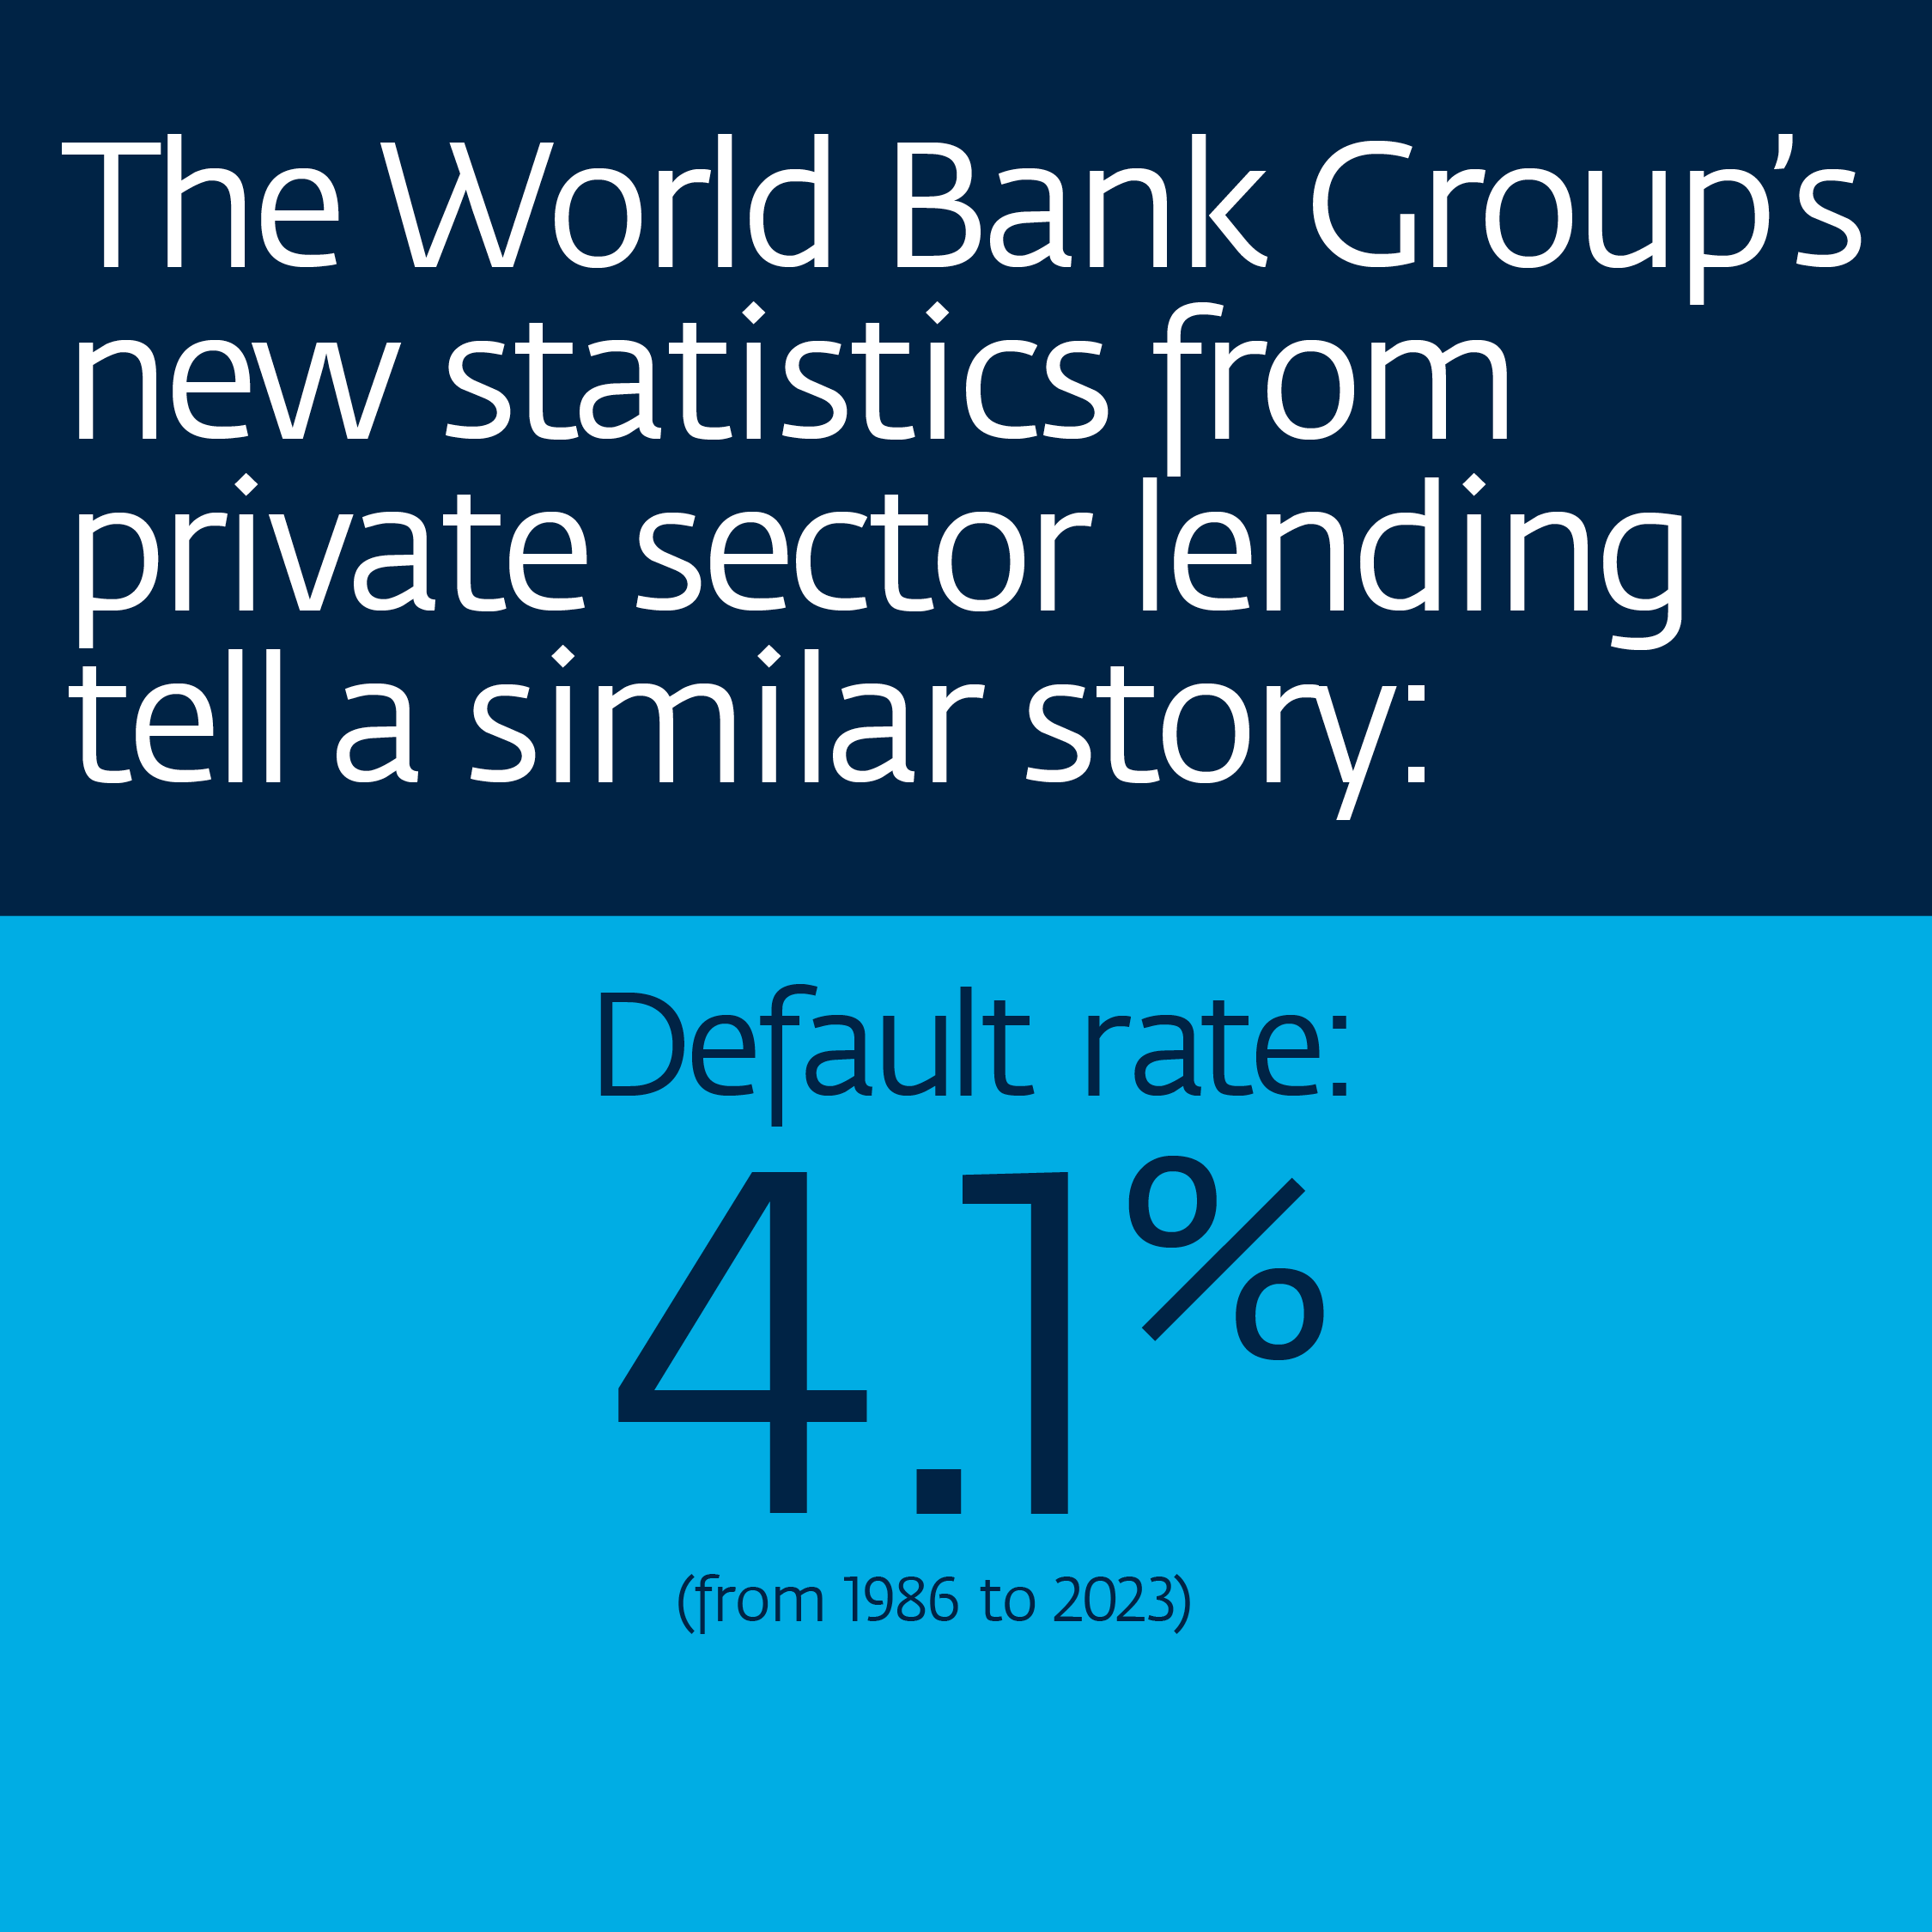 The World Bank Groups statistics from private sector landing tell a similar story.